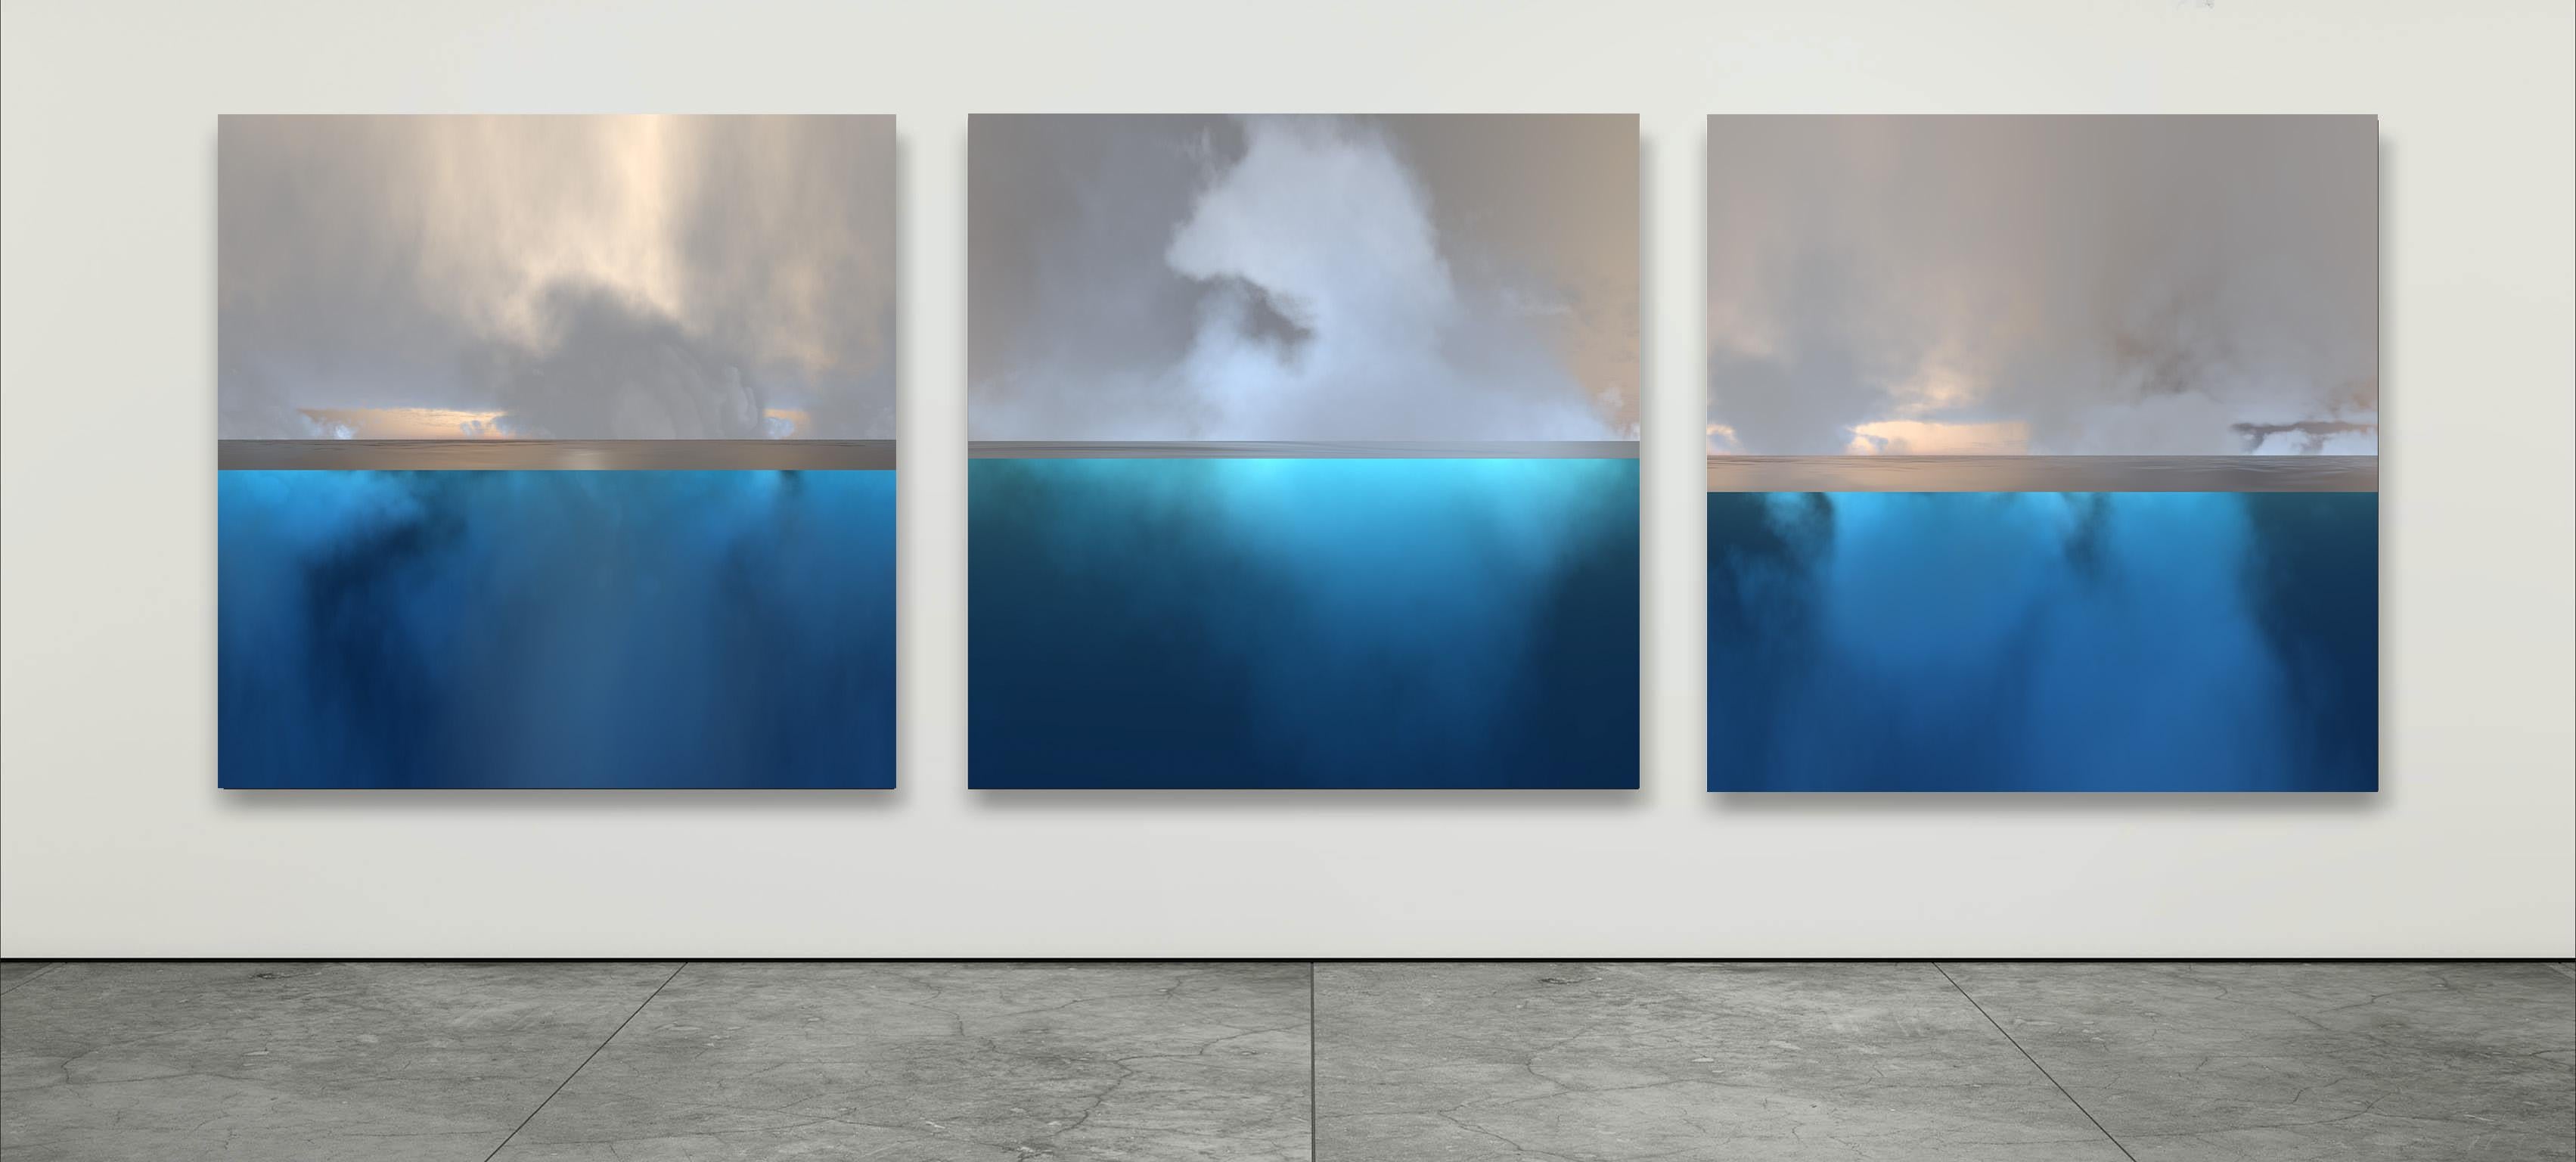 Paul-Émile Rioux Landscape Photograph - Triptych Clouds - Underwater World in Nuances of Blue - Abstract Seascapes